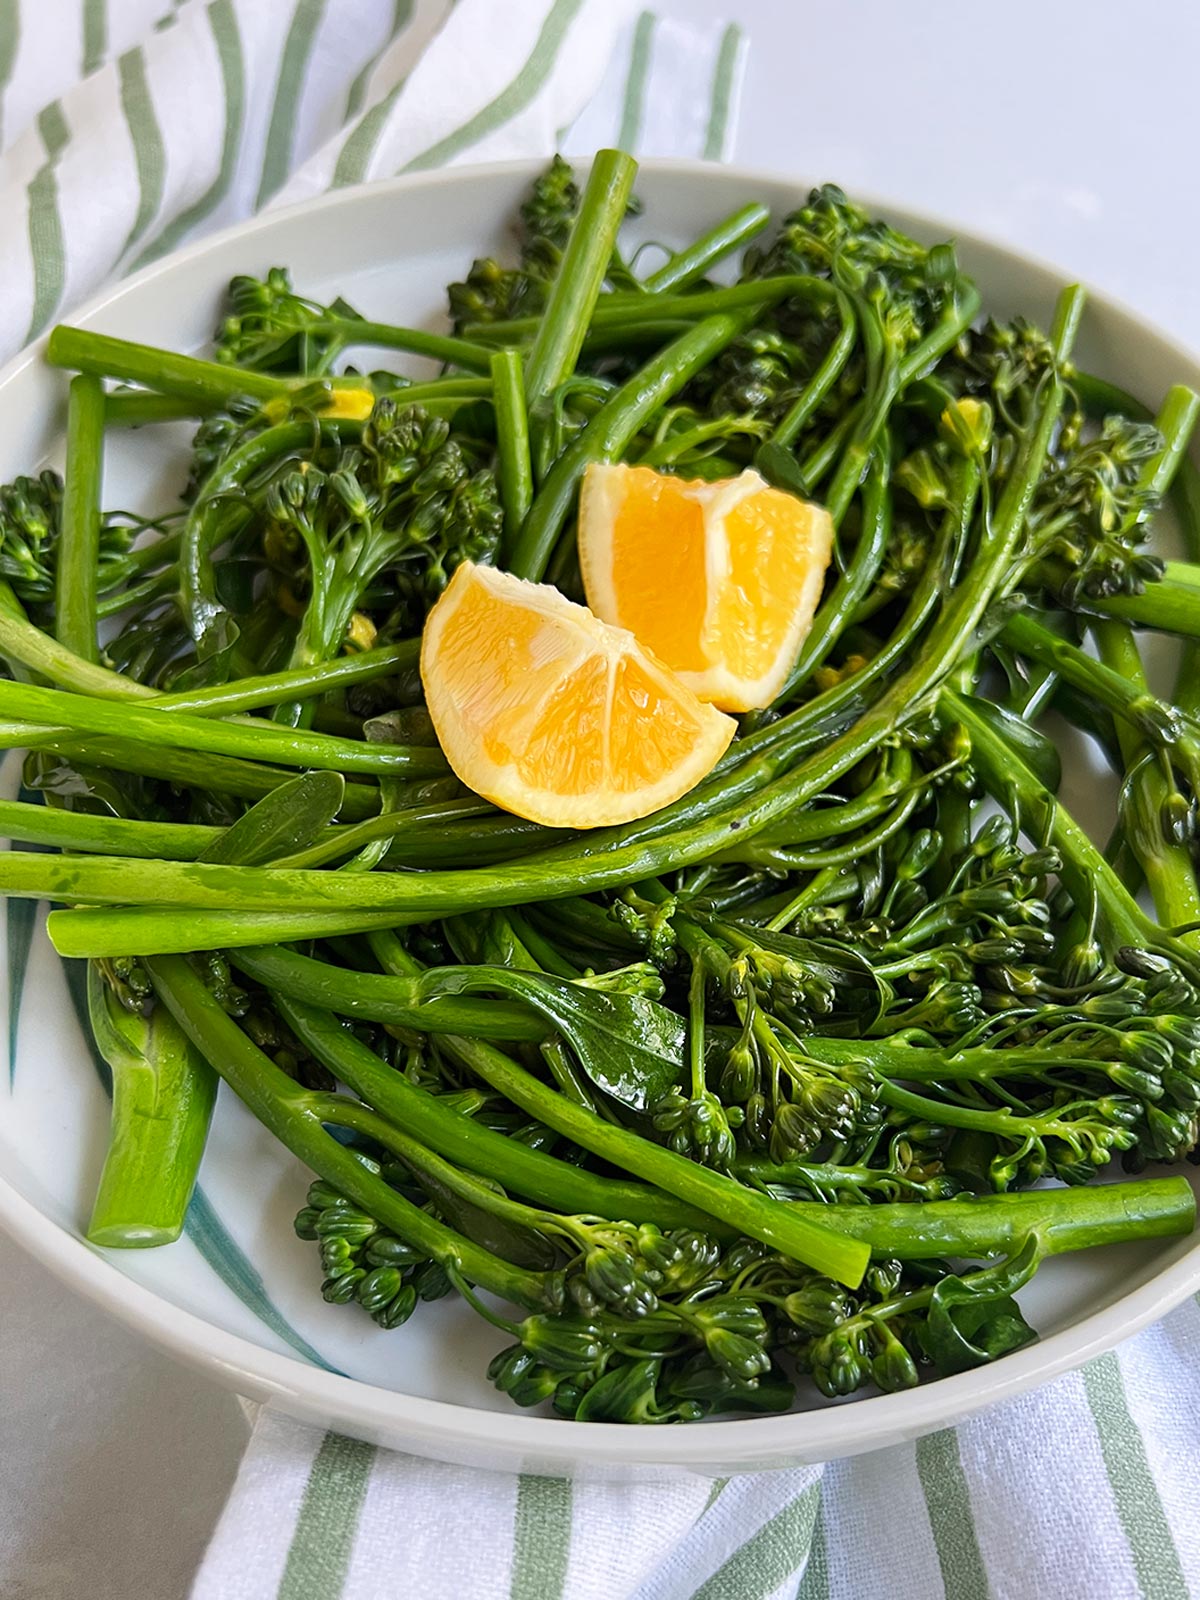 Angle view of plated broccolini with a striped napkin underneath.